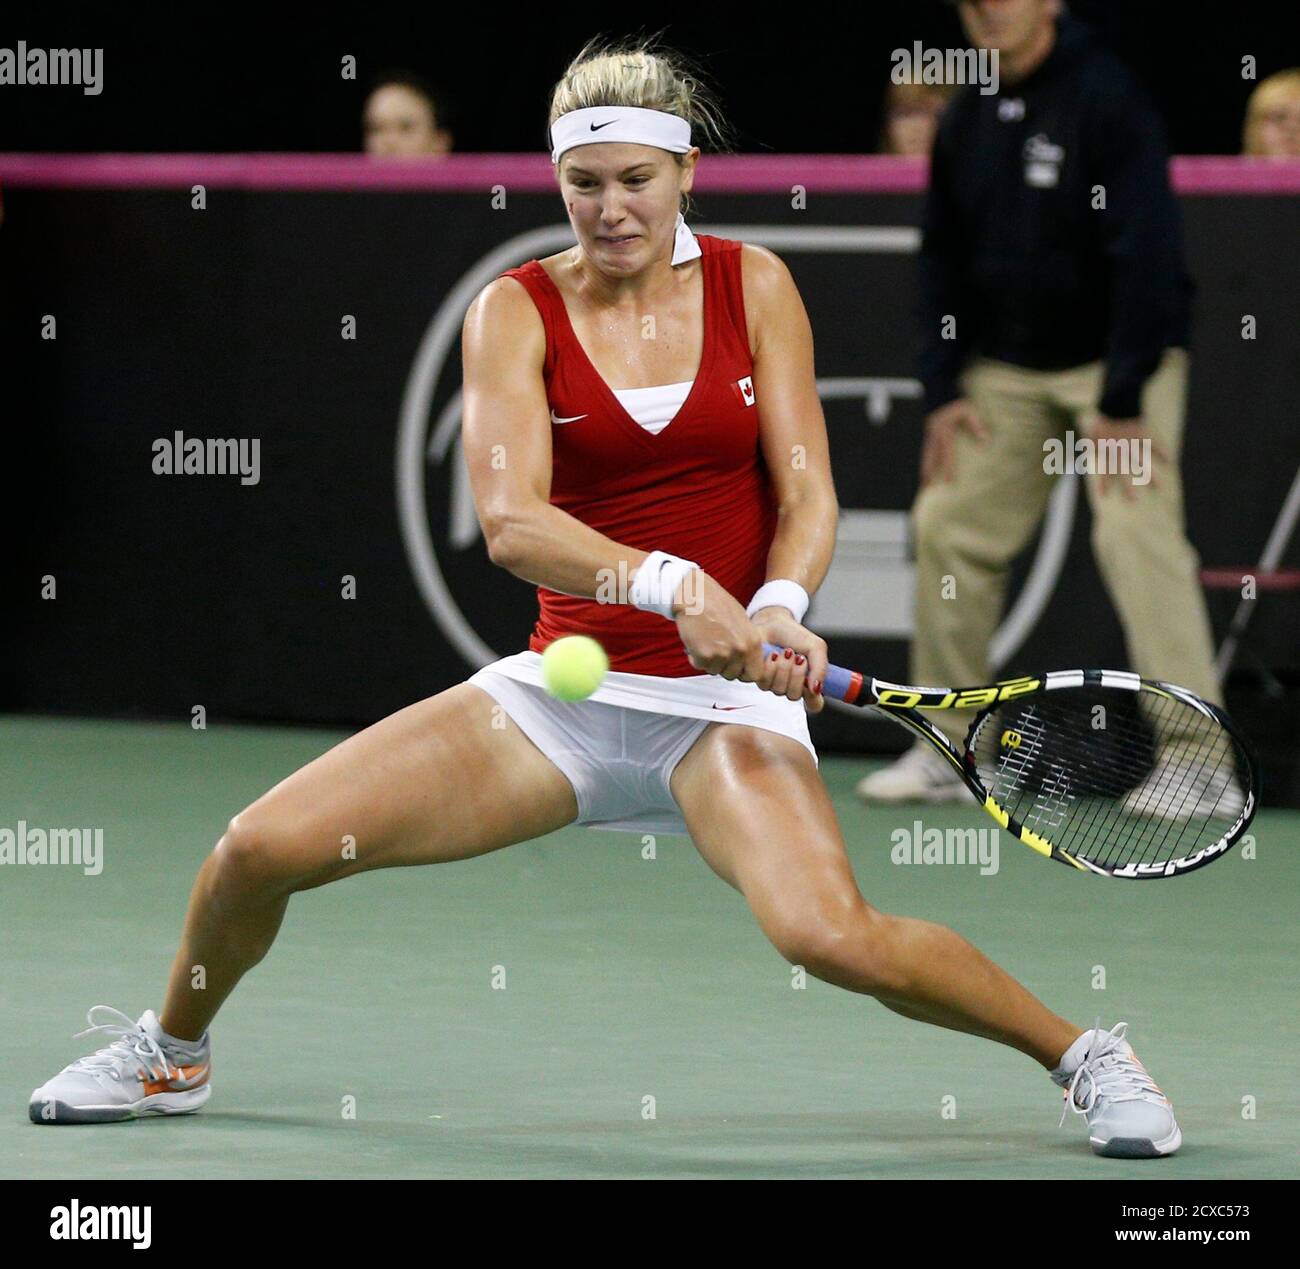 Cut off Microprocessor grammar Canada's Eugenie Bouchard plays a shot against Slovakia's Kristina Kucova  during their Fed Cup tennis match at the PEPS stadium at Laval University  in Quebec City, April 19, 2014. REUTERS/Mathieu Belanger (CANADA -